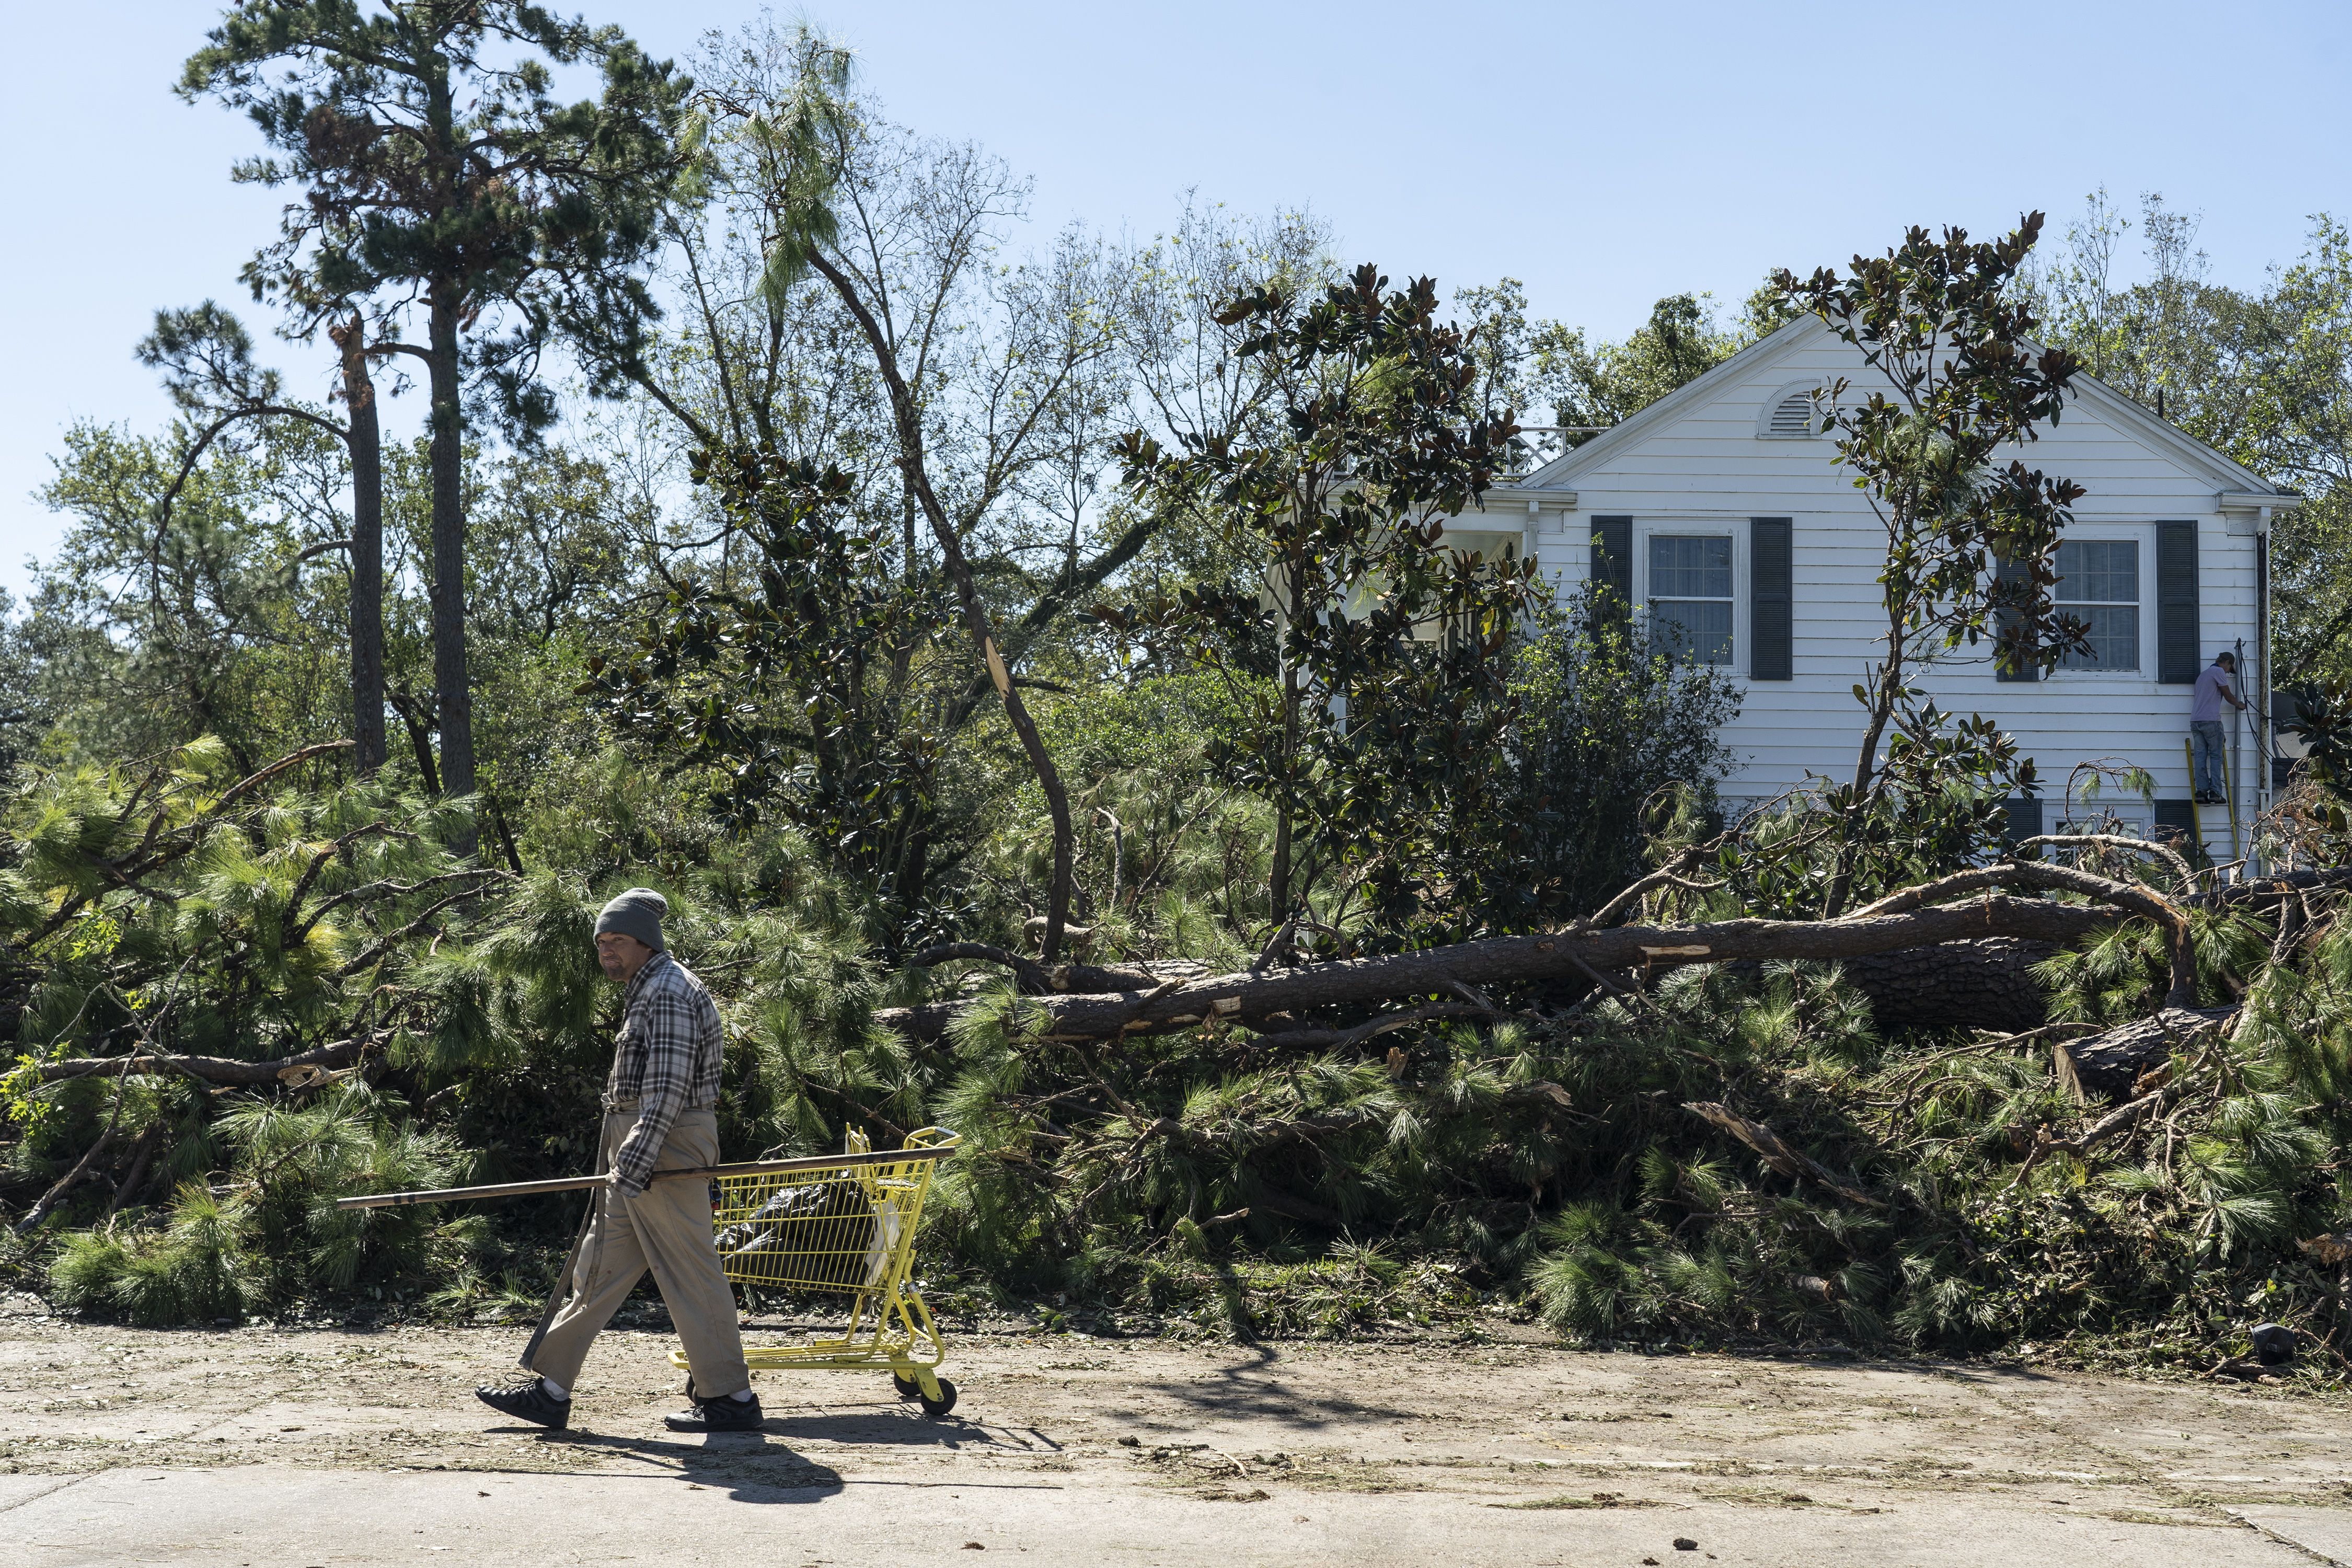  A person pulls a shopping cart in front of fallen trees after Hurricane Delta passed through the area on October 10, 2020 in Jennings, Louisiana. 